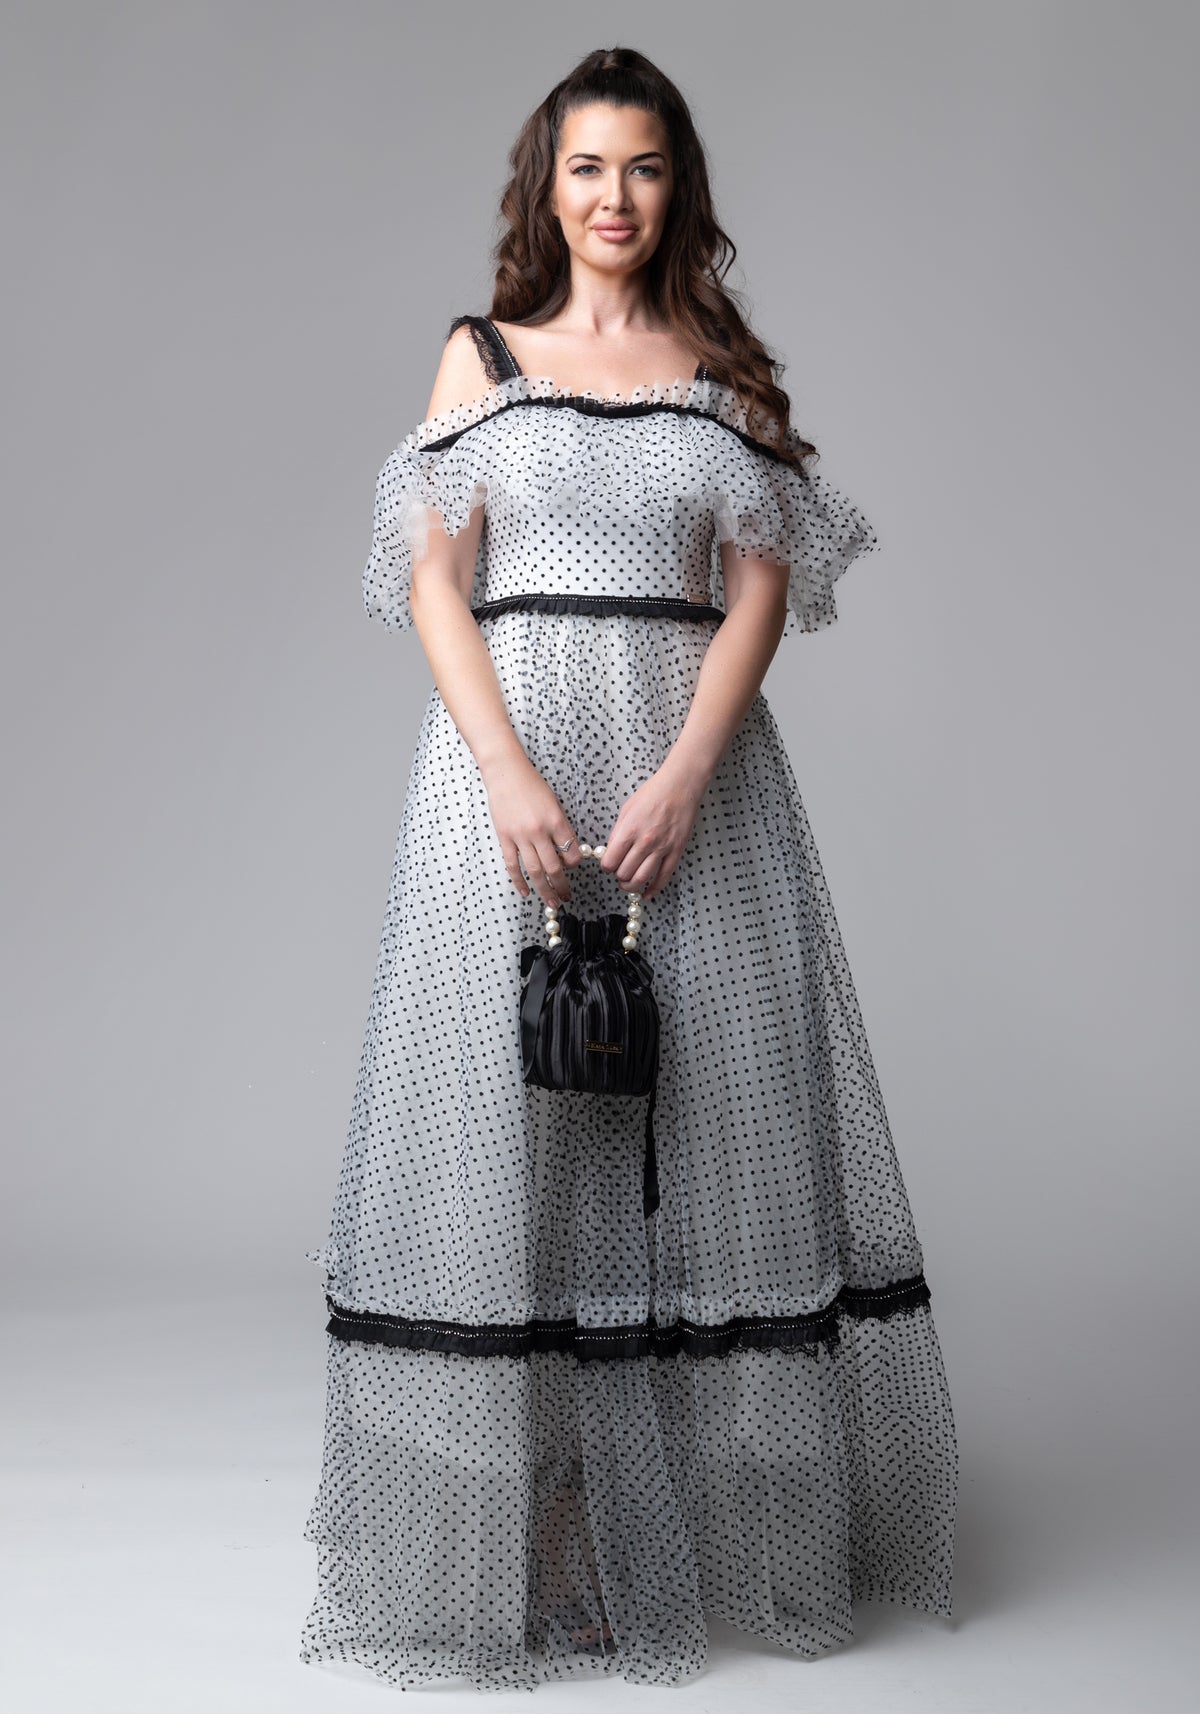 White spotted dress